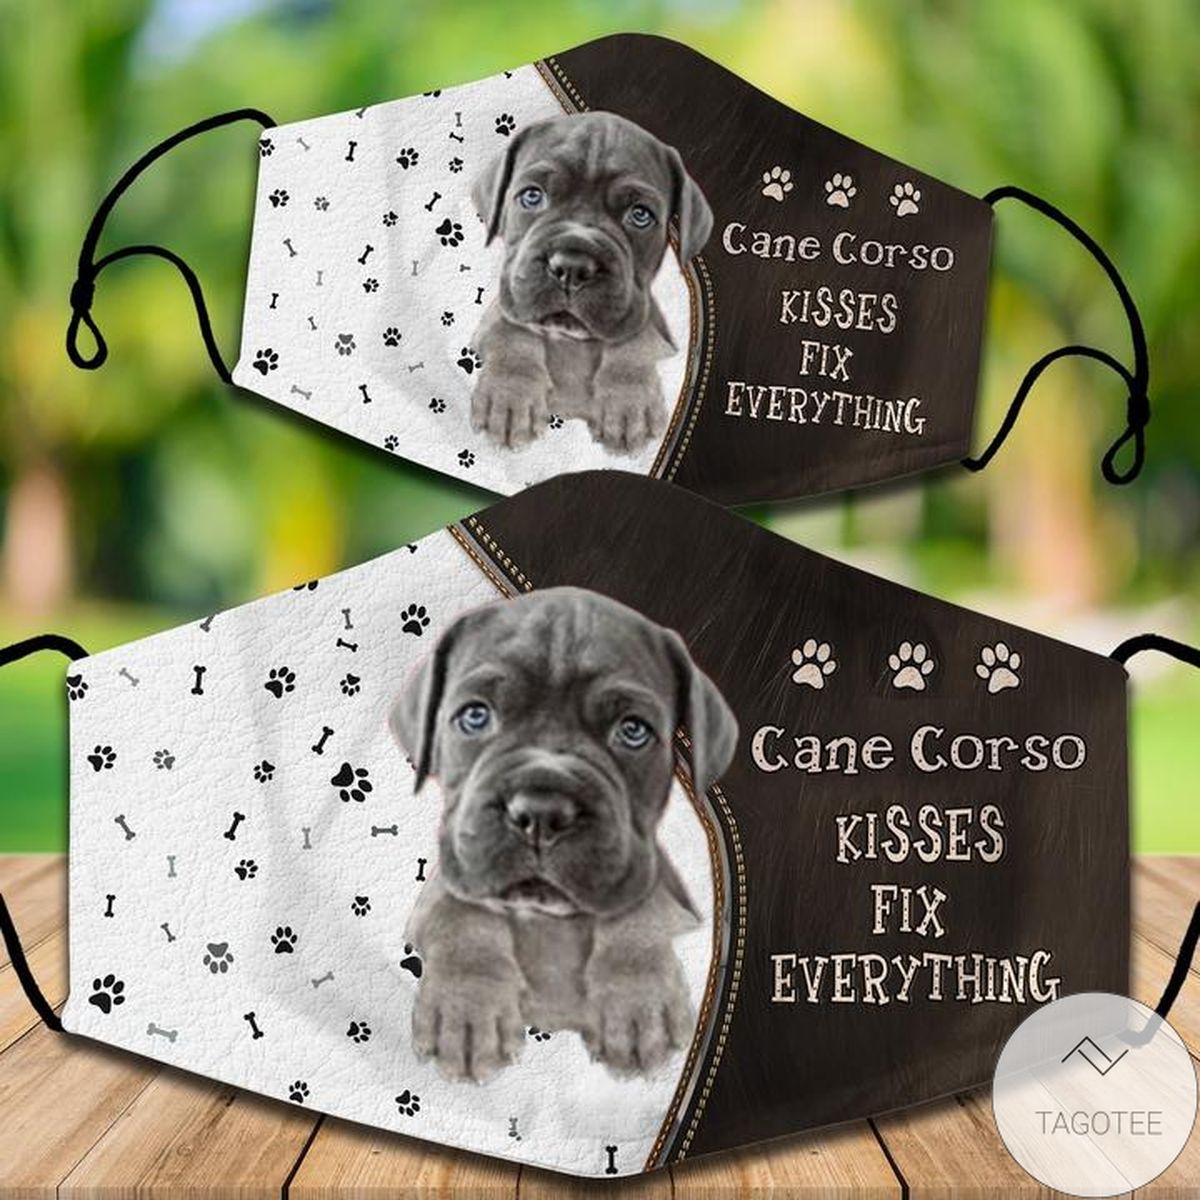 Cane Corso Kisses Fix Everything Face Mask